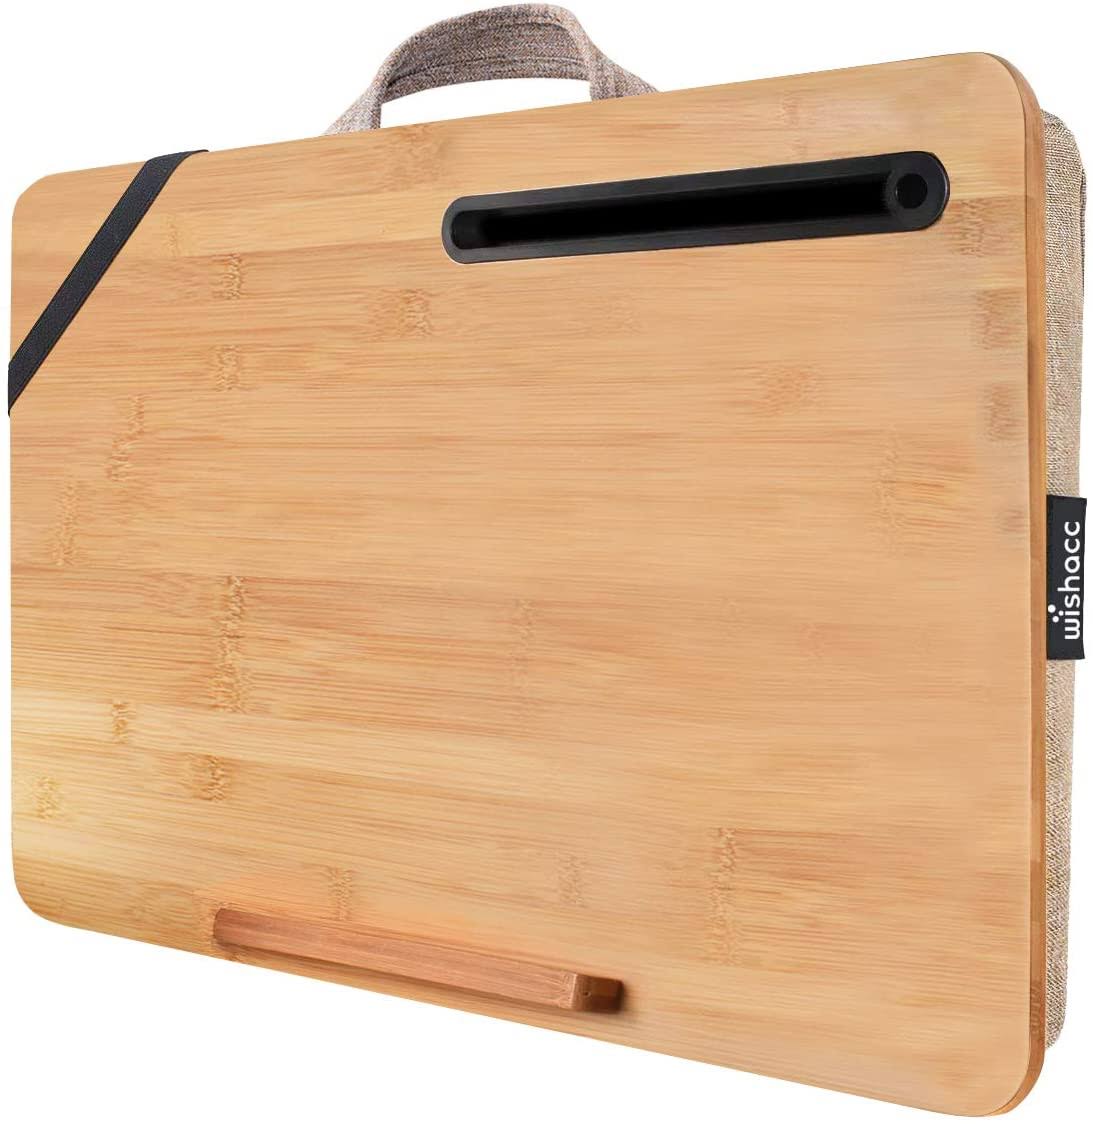 Lap Desk,Wishacc Portable Bamboo Lap Desk Tray For Home Office